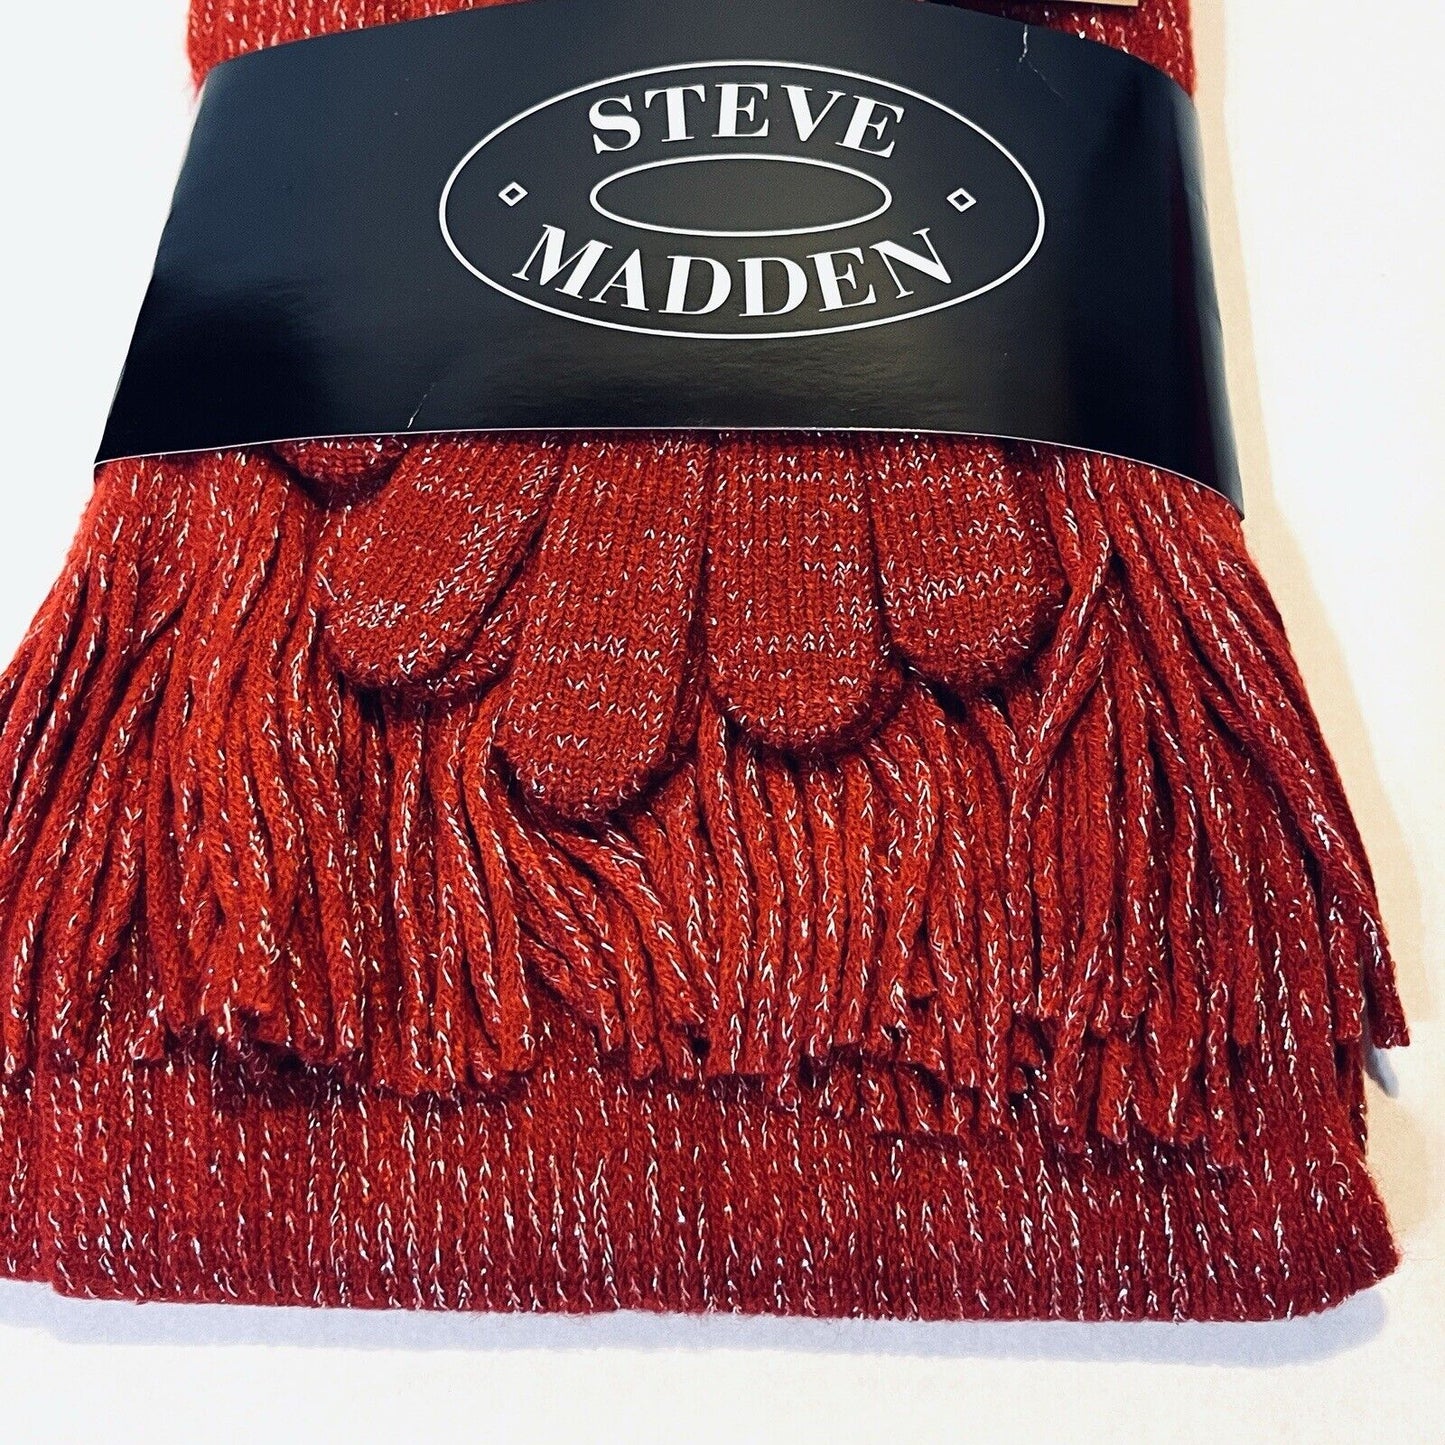 Steve Madden Womens Scarf Gloves Gift Set Red Silver Long Scarf Holiday Winter